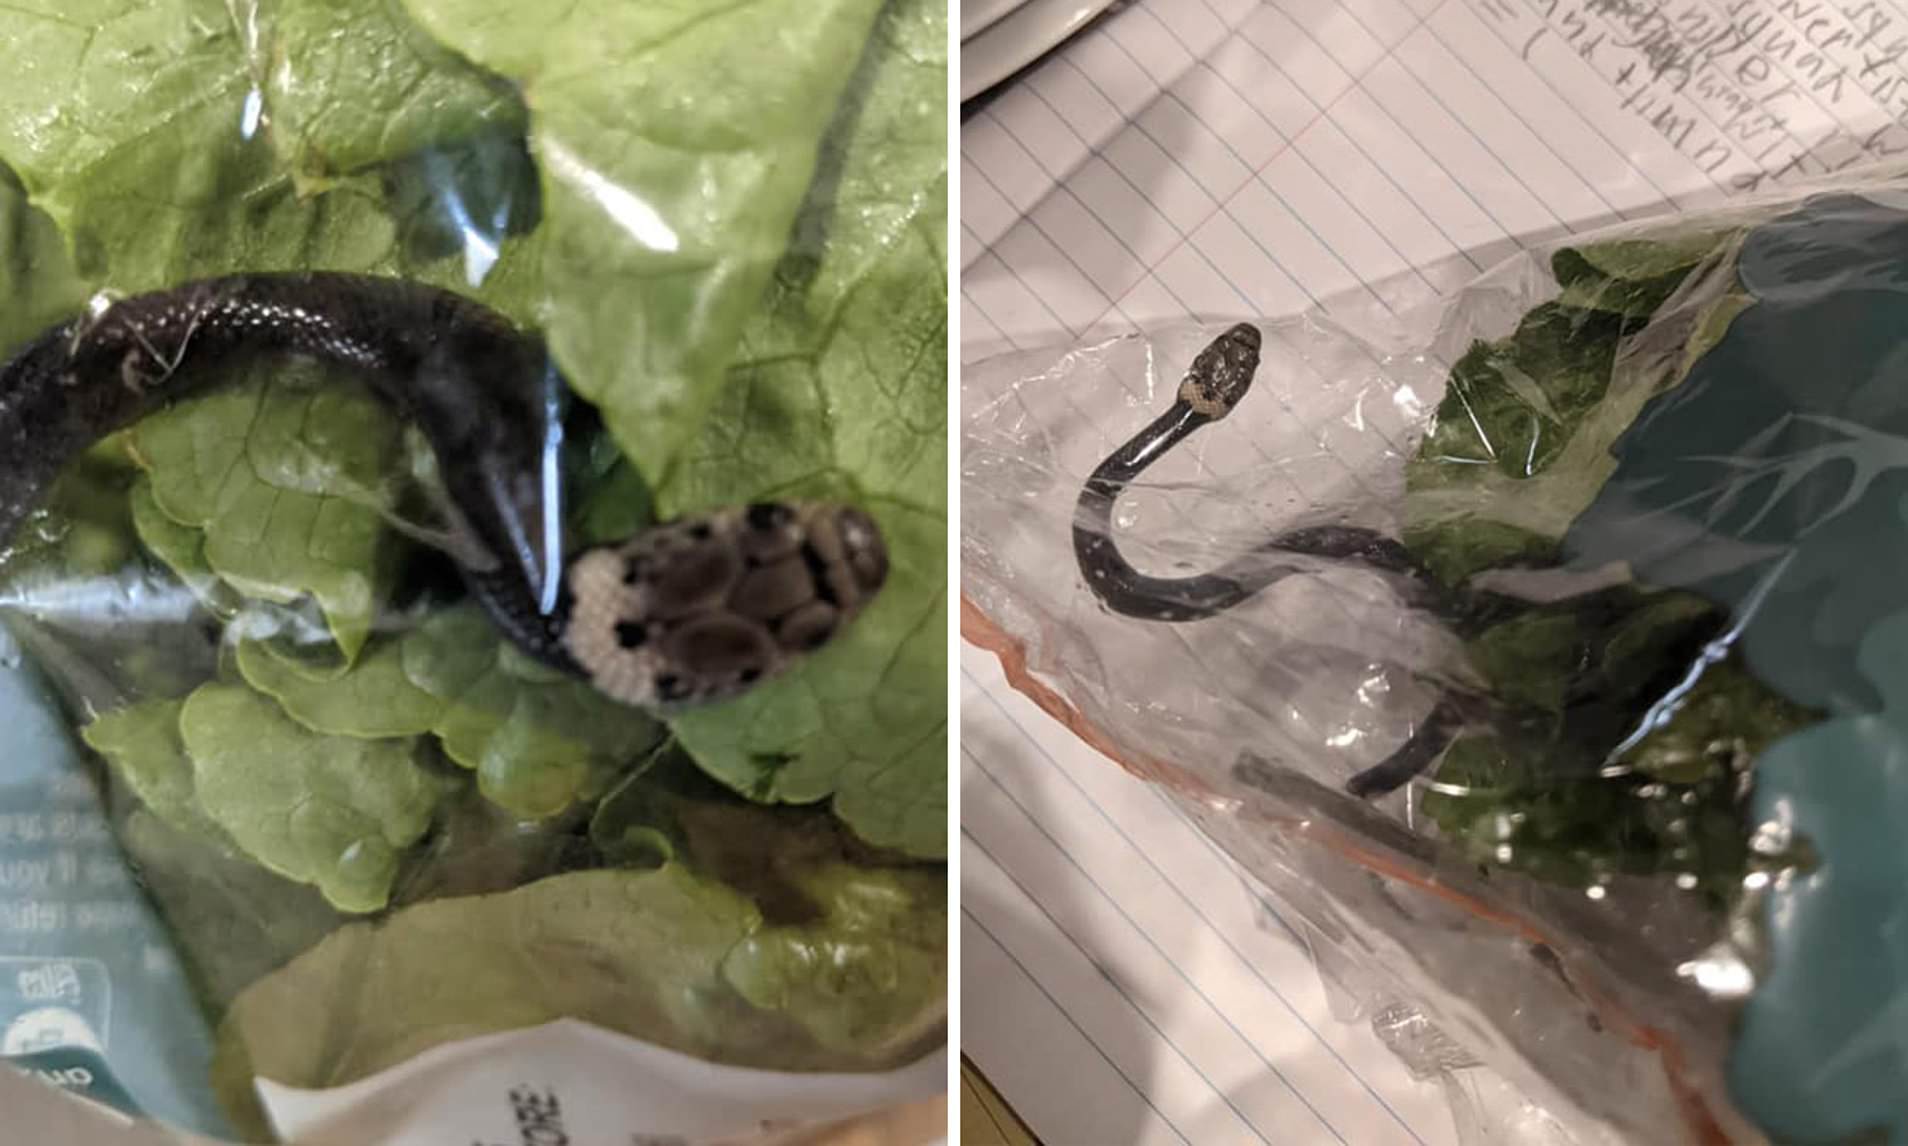 Snake Found Hiding In A Bag Of Lettuce At Grocery Store